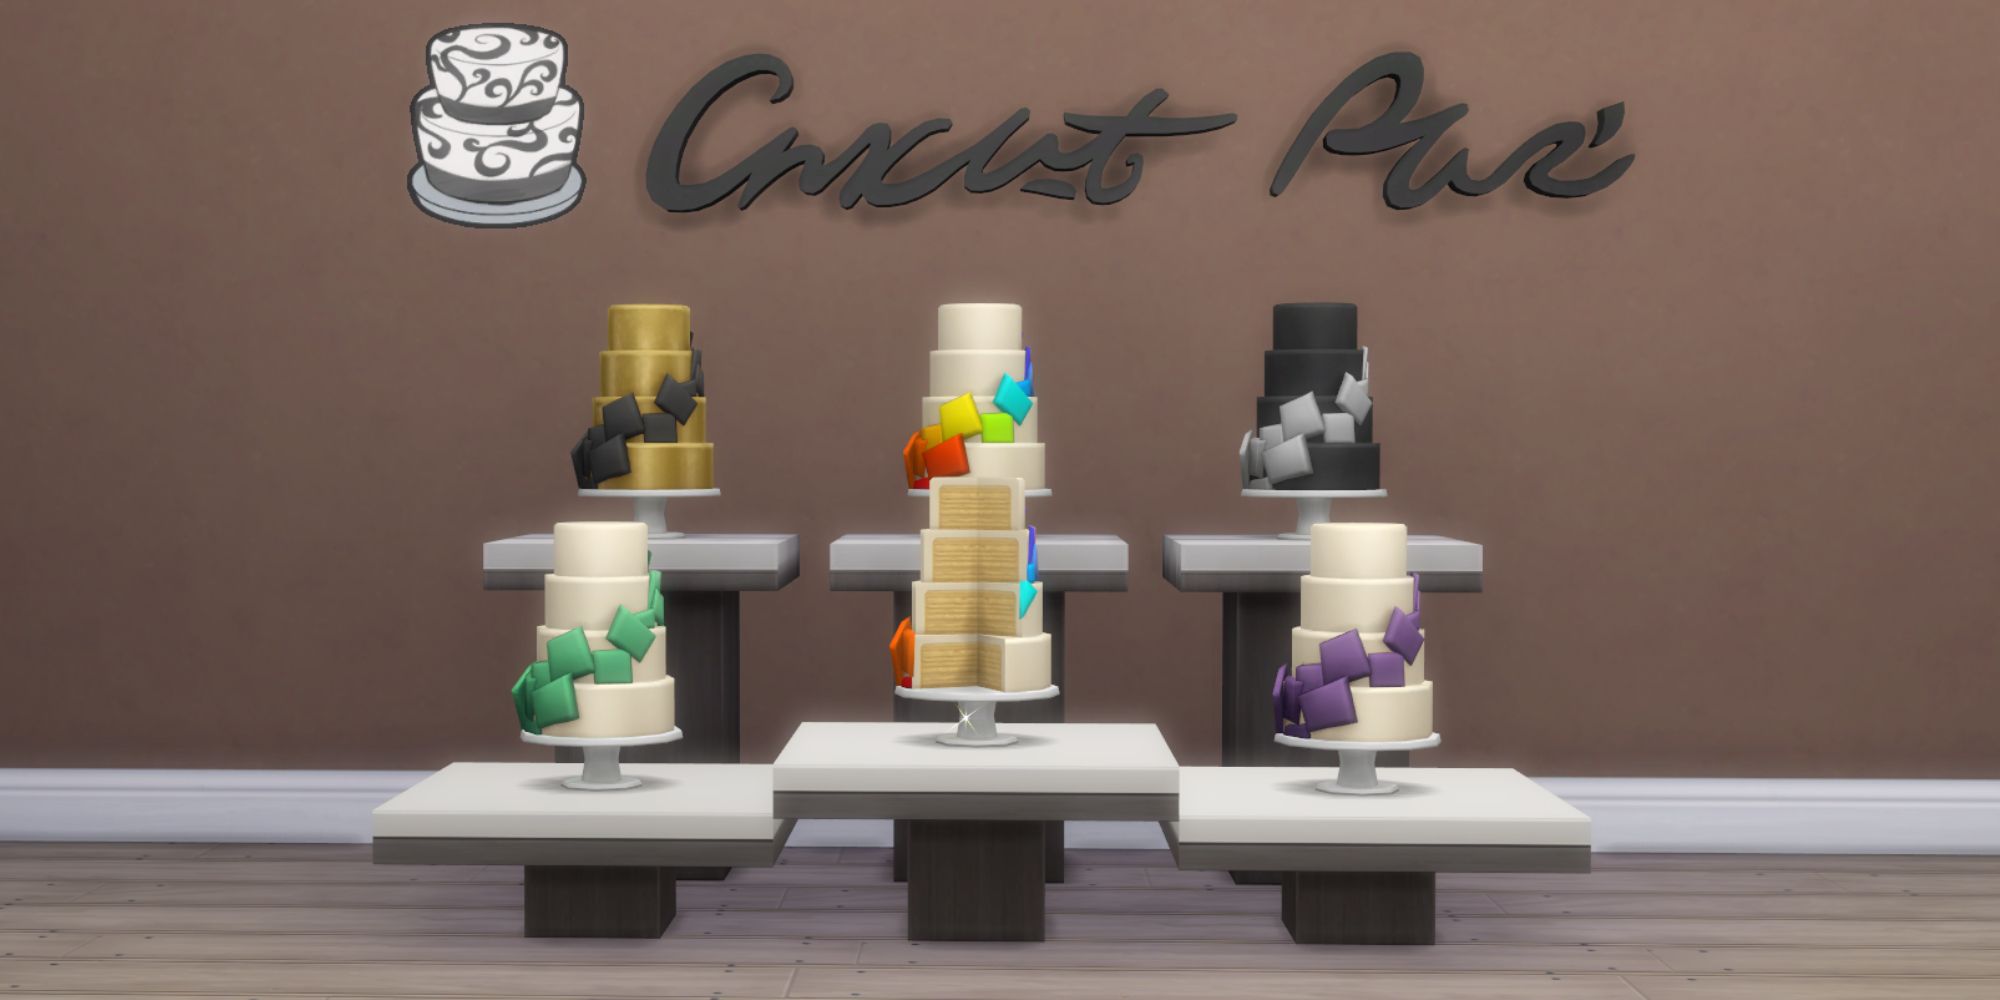 The Sims 4 My Wedding Stories Every New Wedding Cake